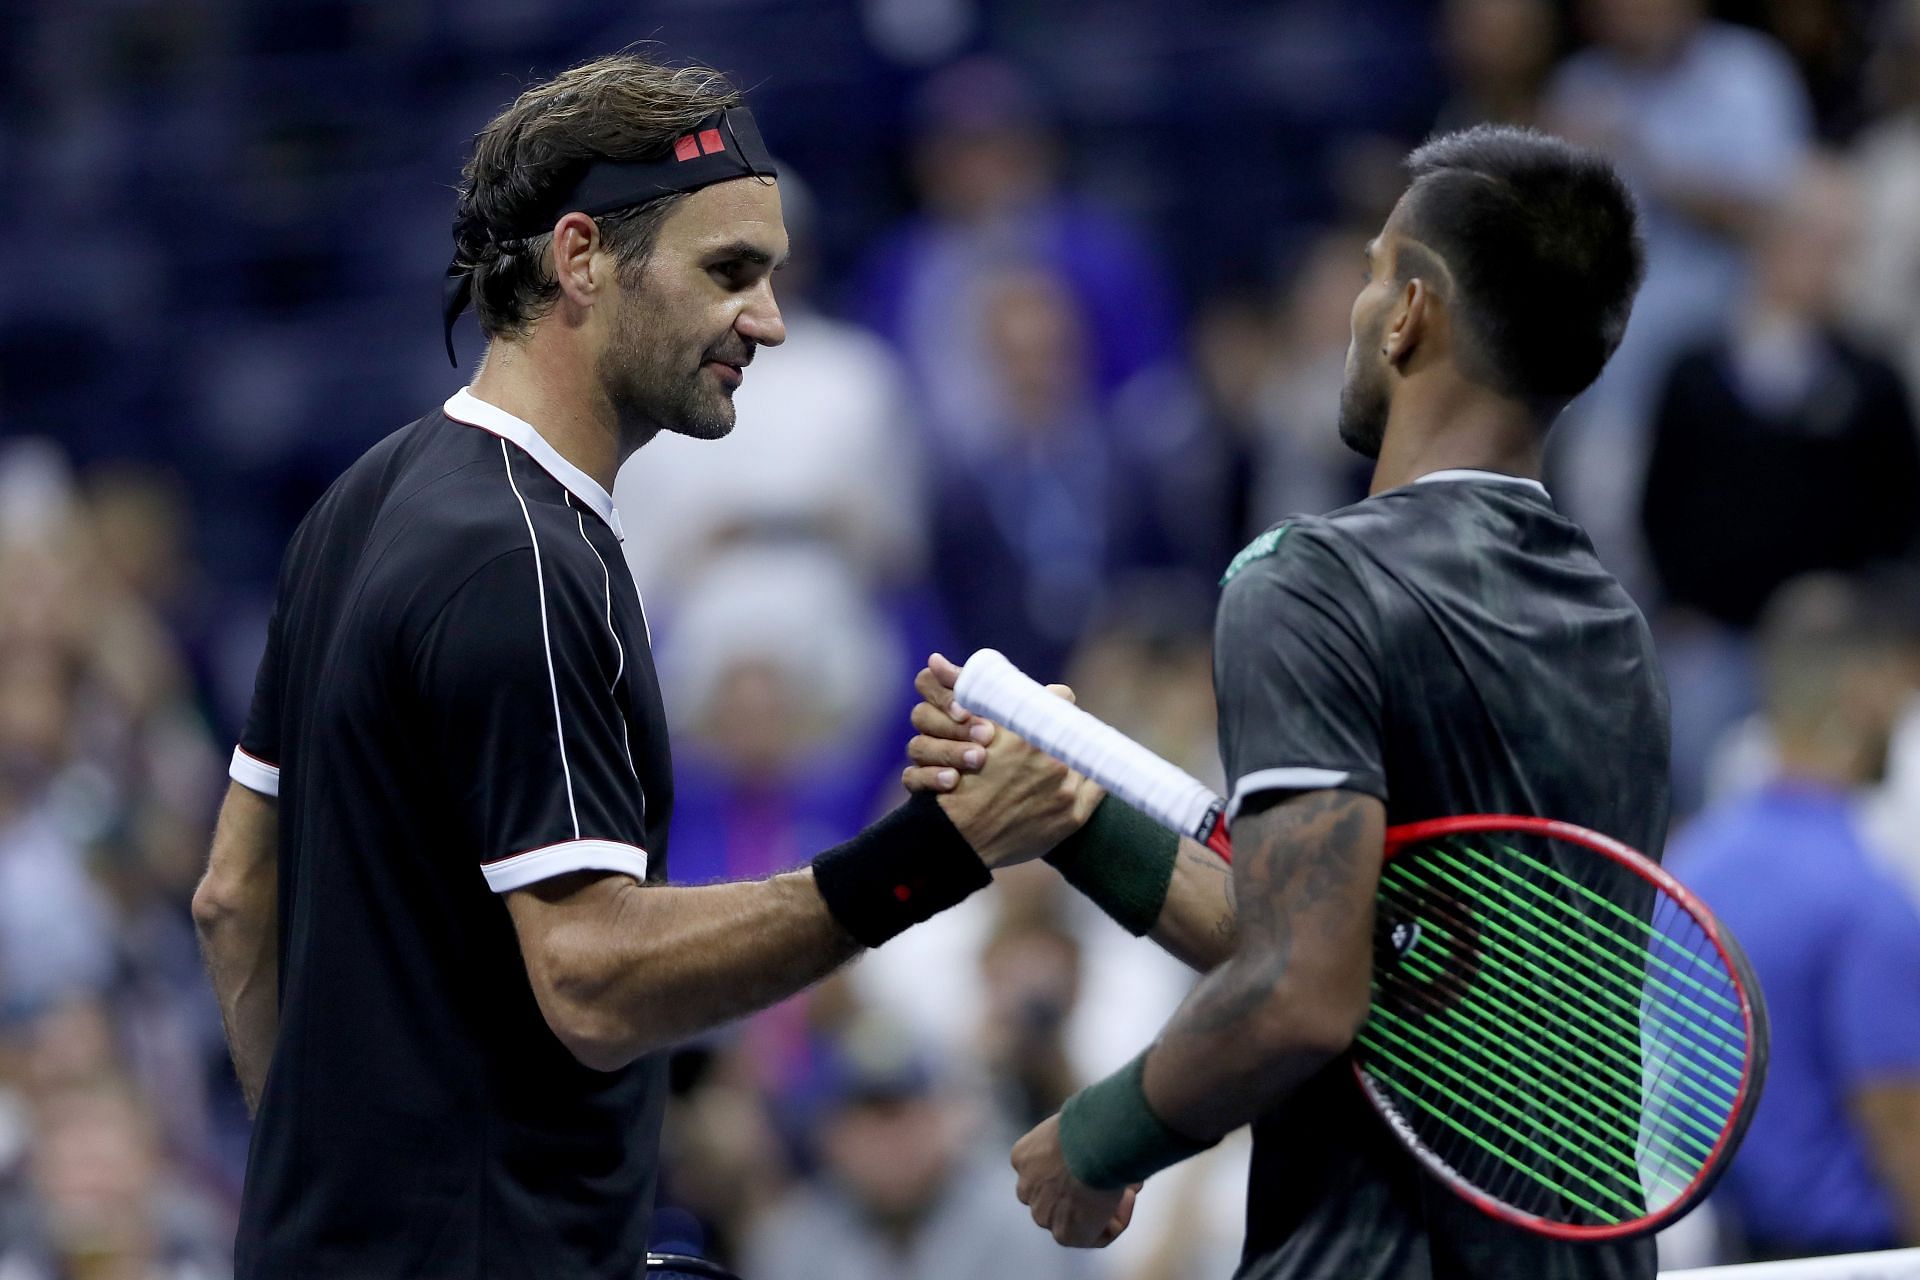 Roger Federer shakes hands with Sumit Nagal at the 2019 US Open